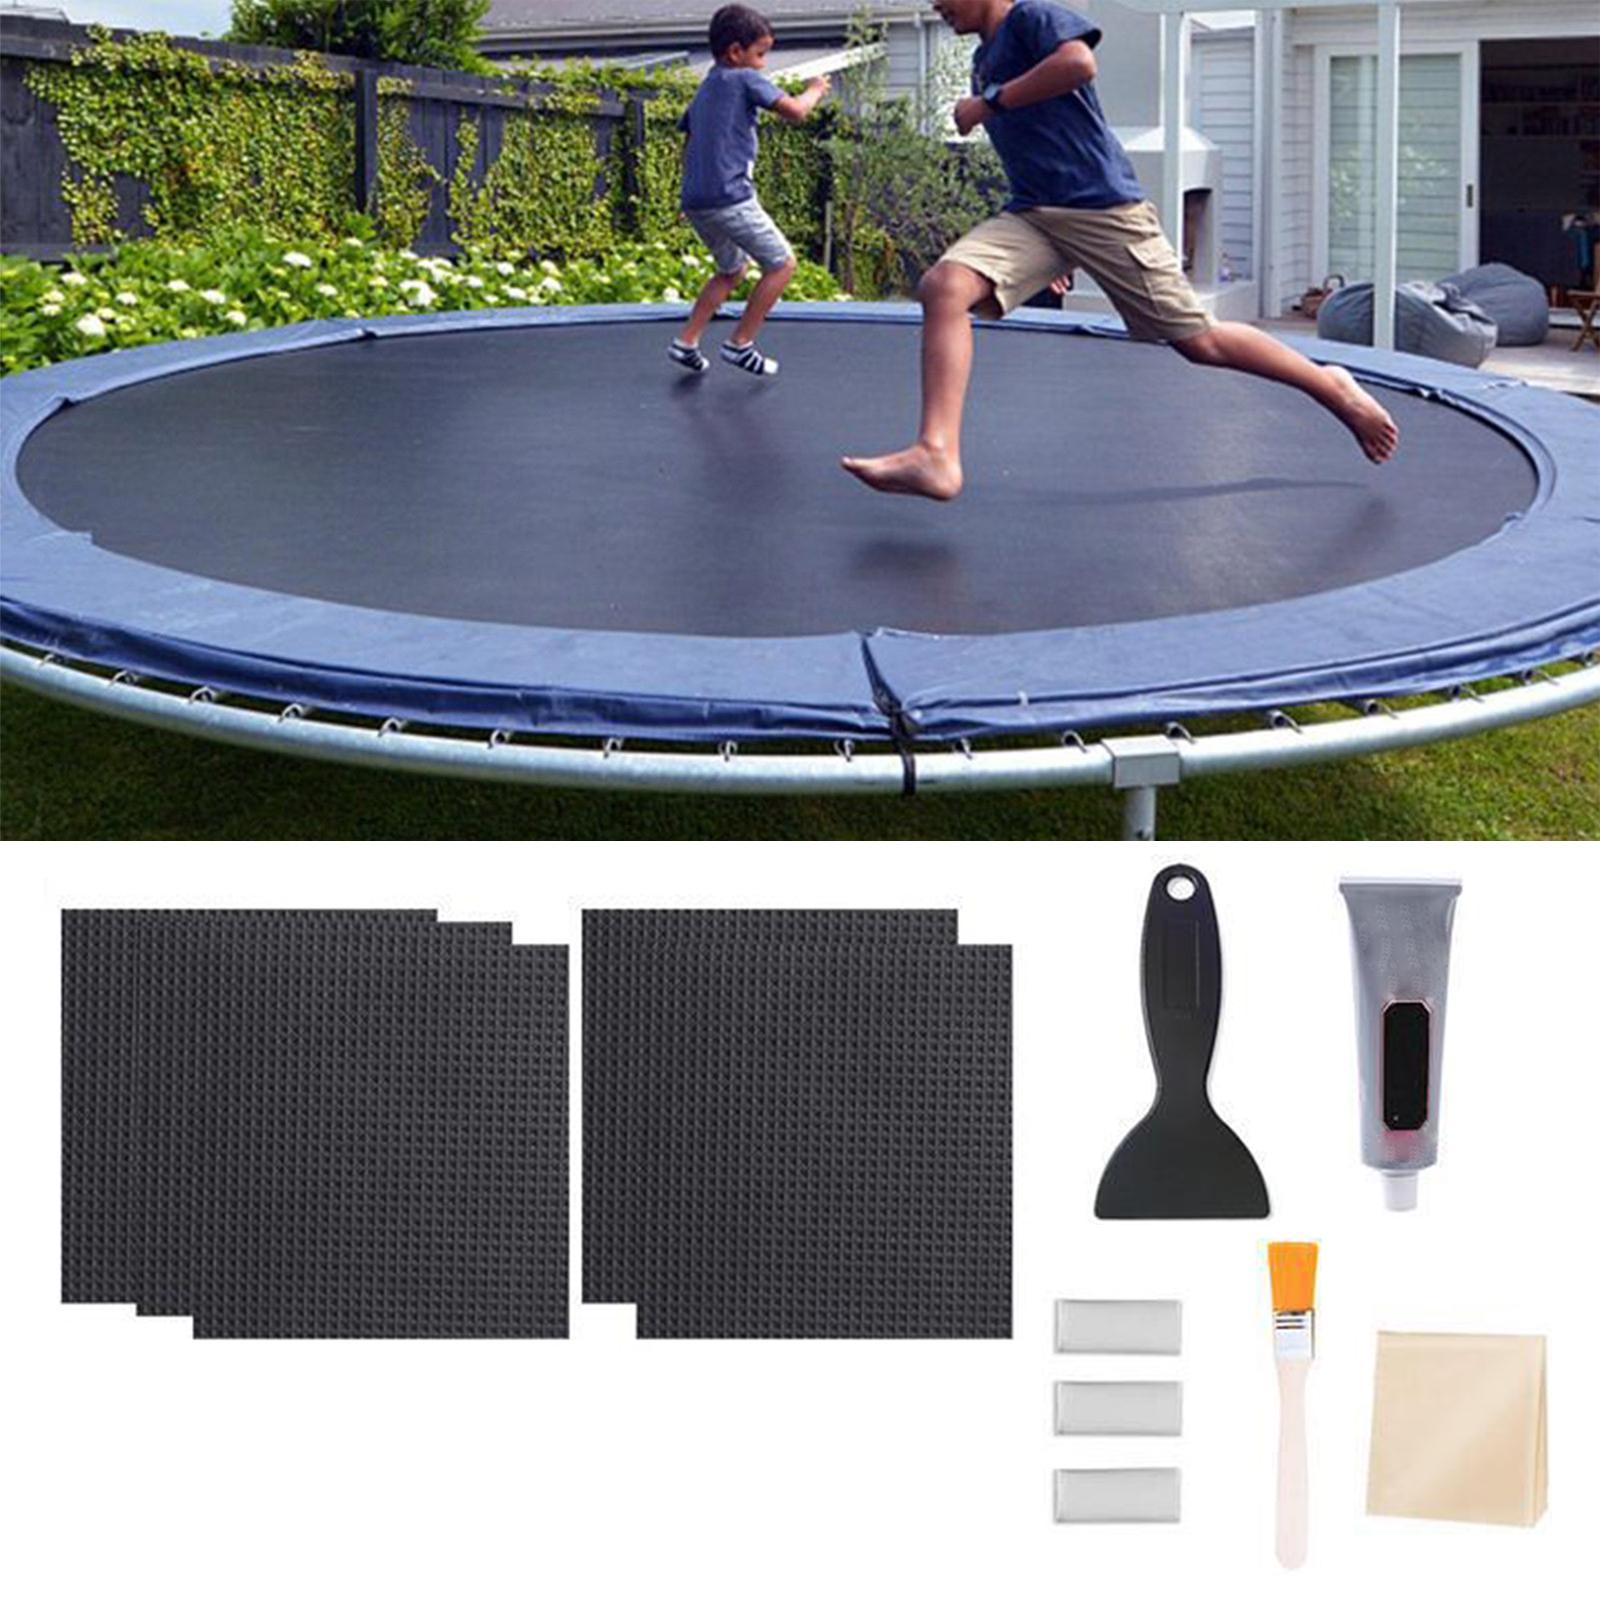 Trampoline Repair Kit Trampoline Pad Holes Broken Replacement Repair Patches Style A